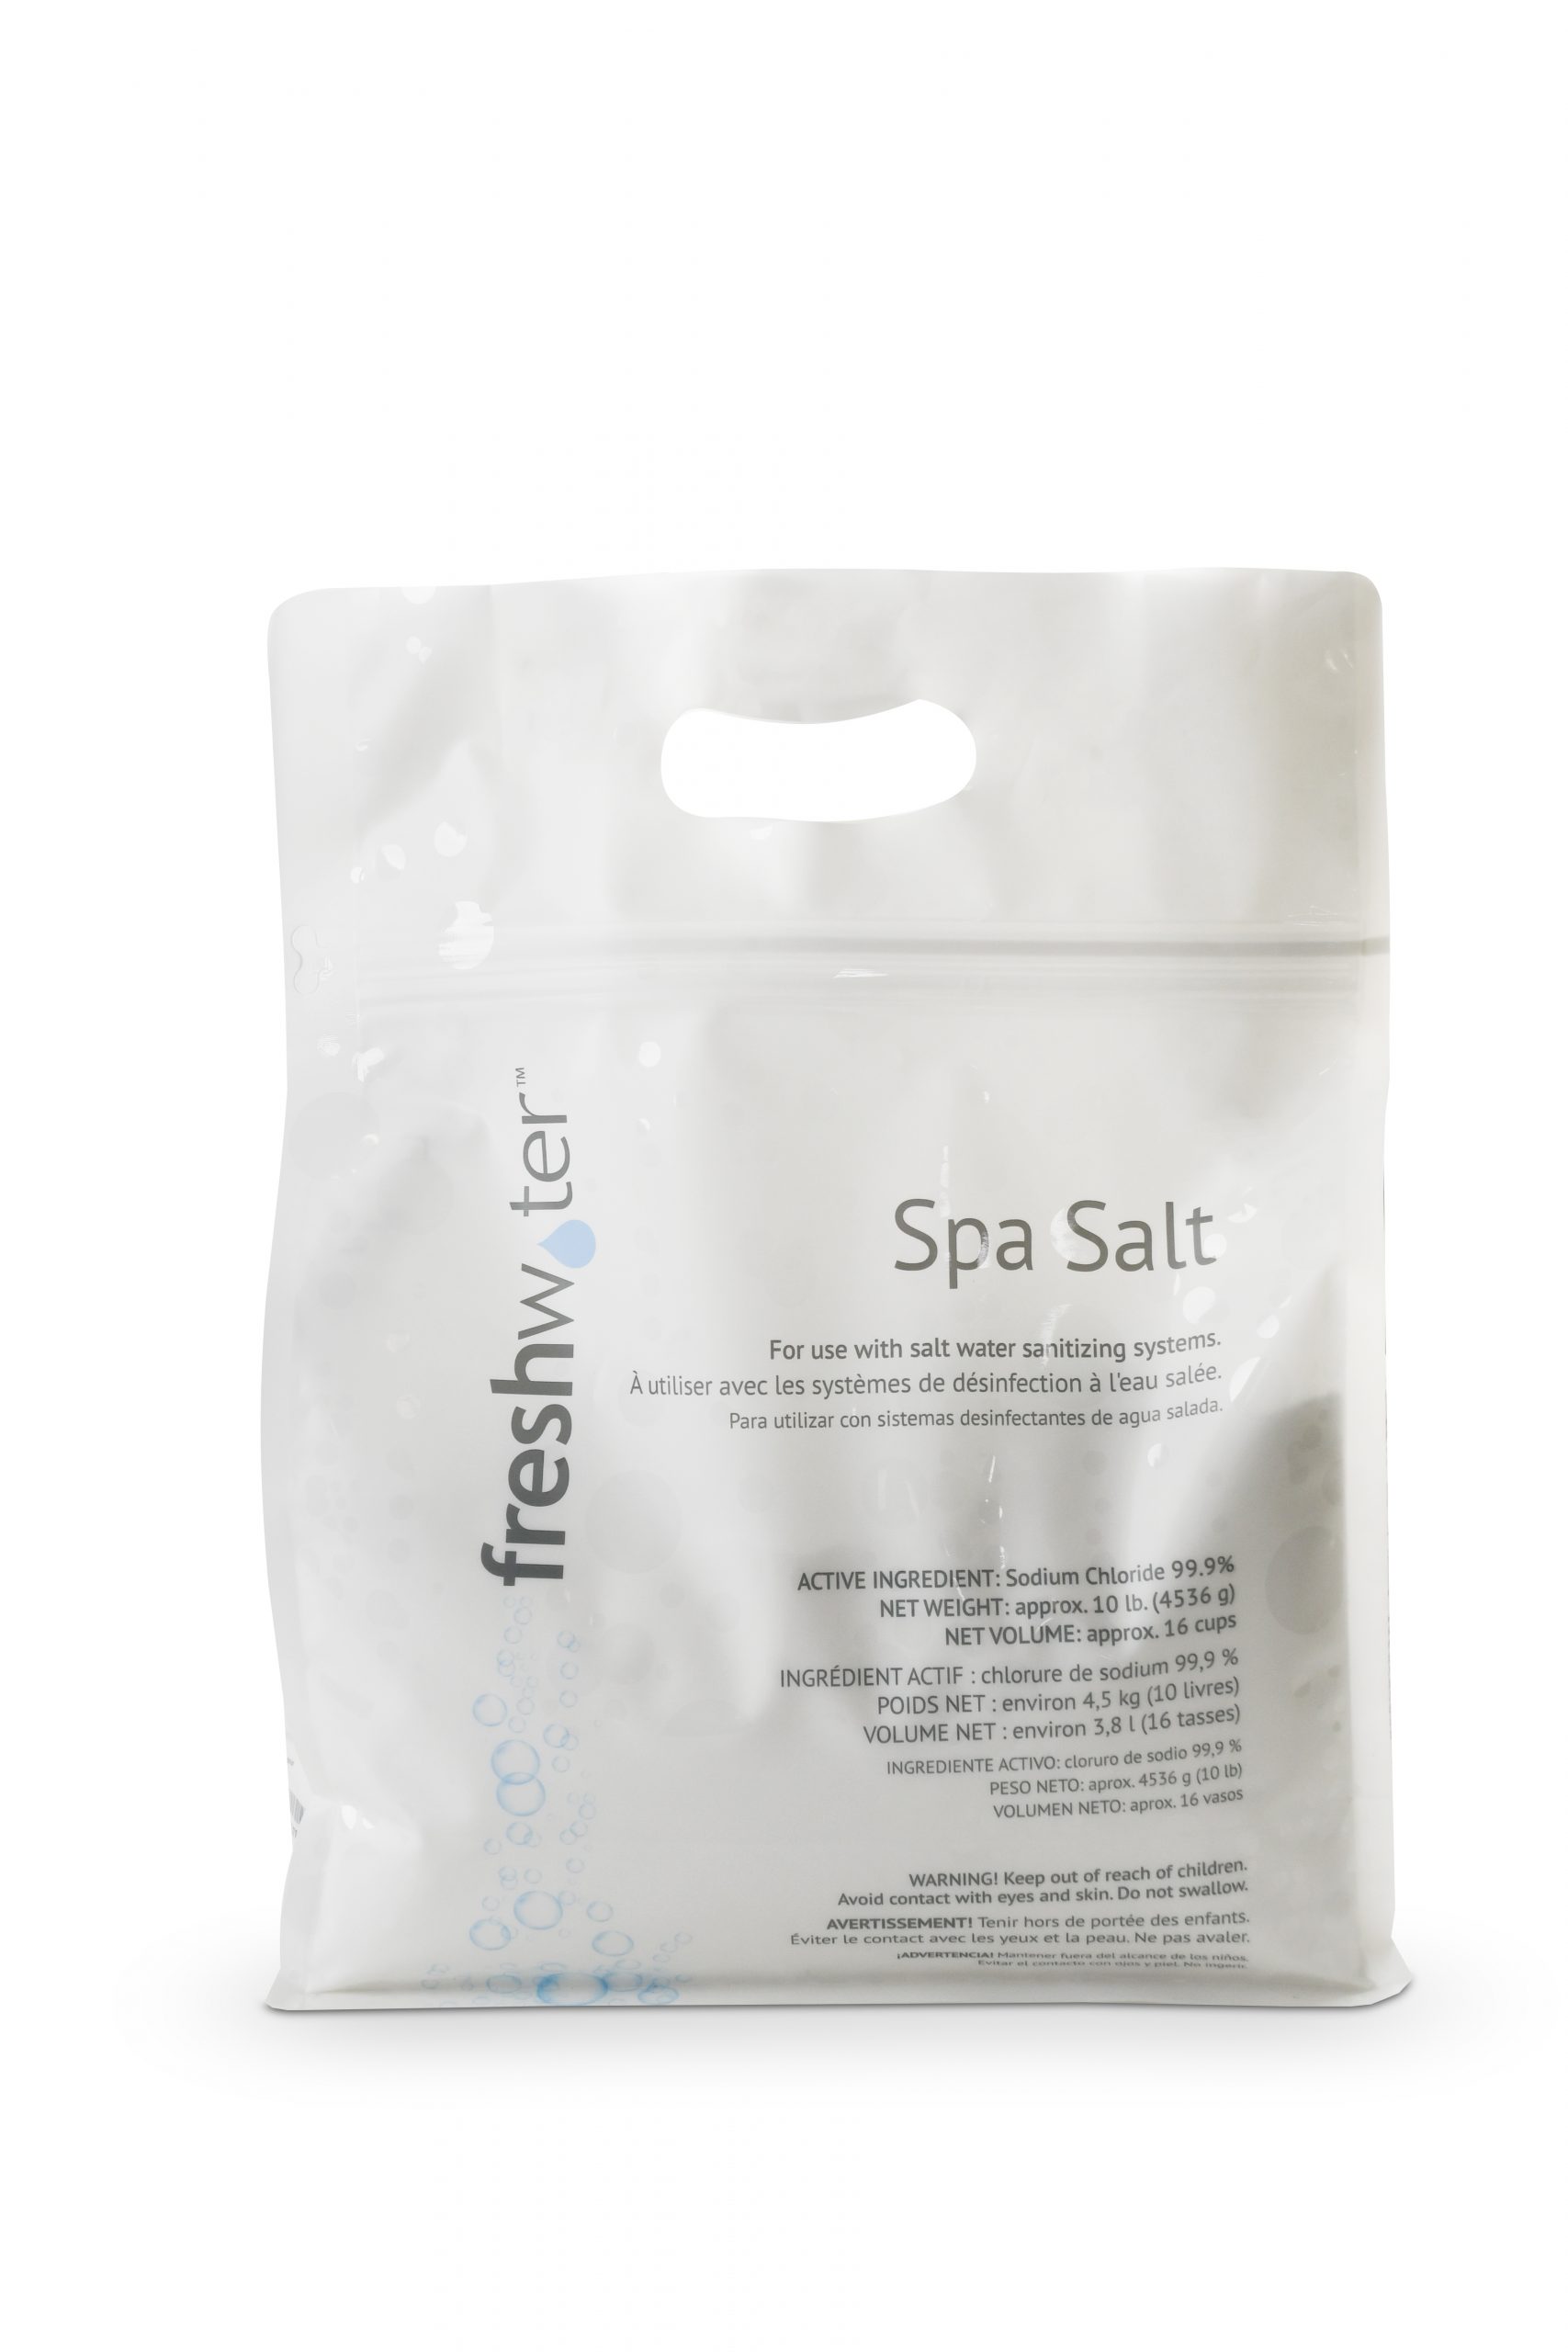 FreshWater Salt bag for use with Freshwater salt systems in Caldera and oth...